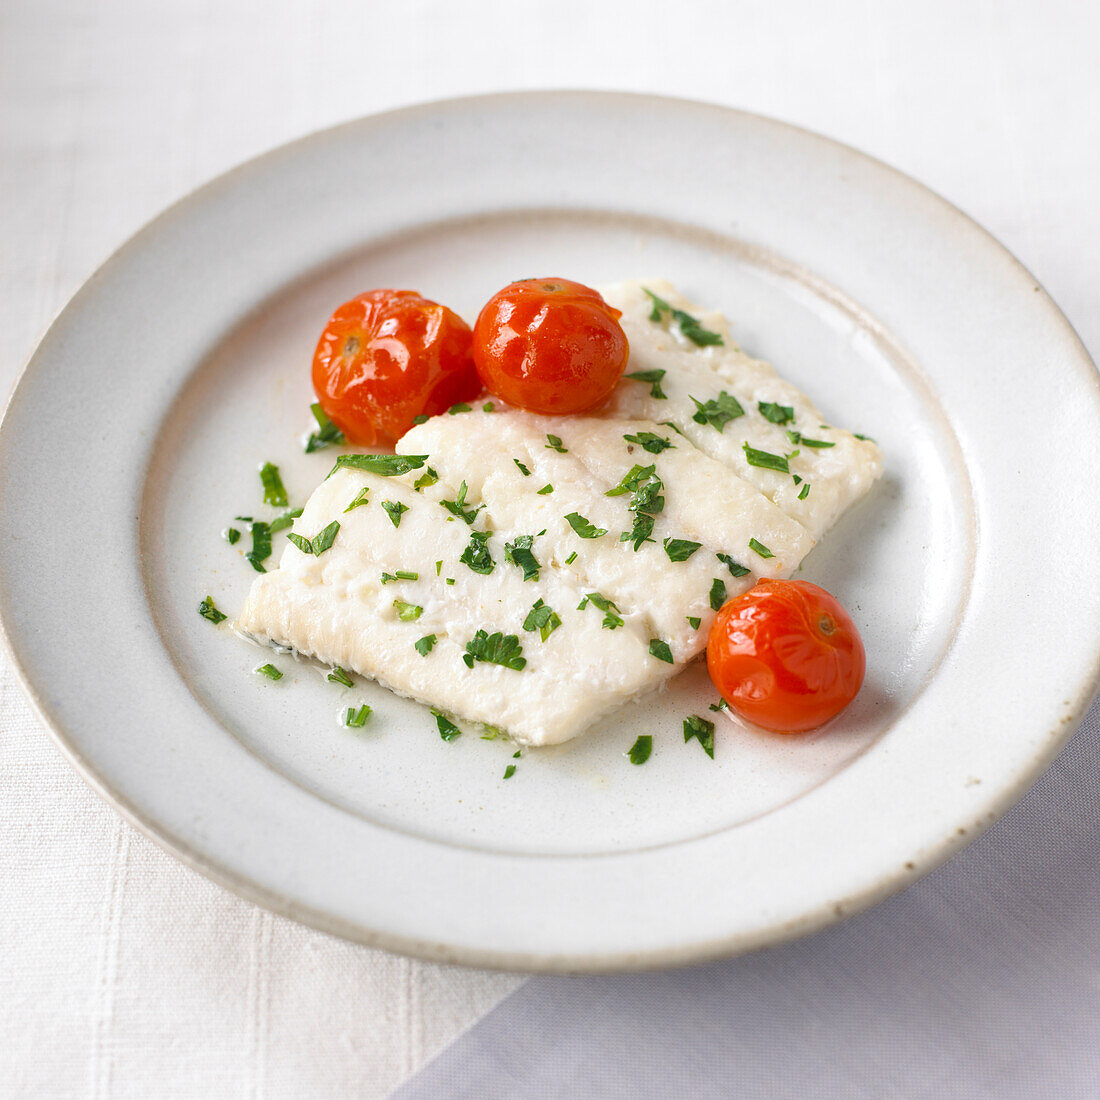 Baked white fish in wine and herbs, cherry tomatoes